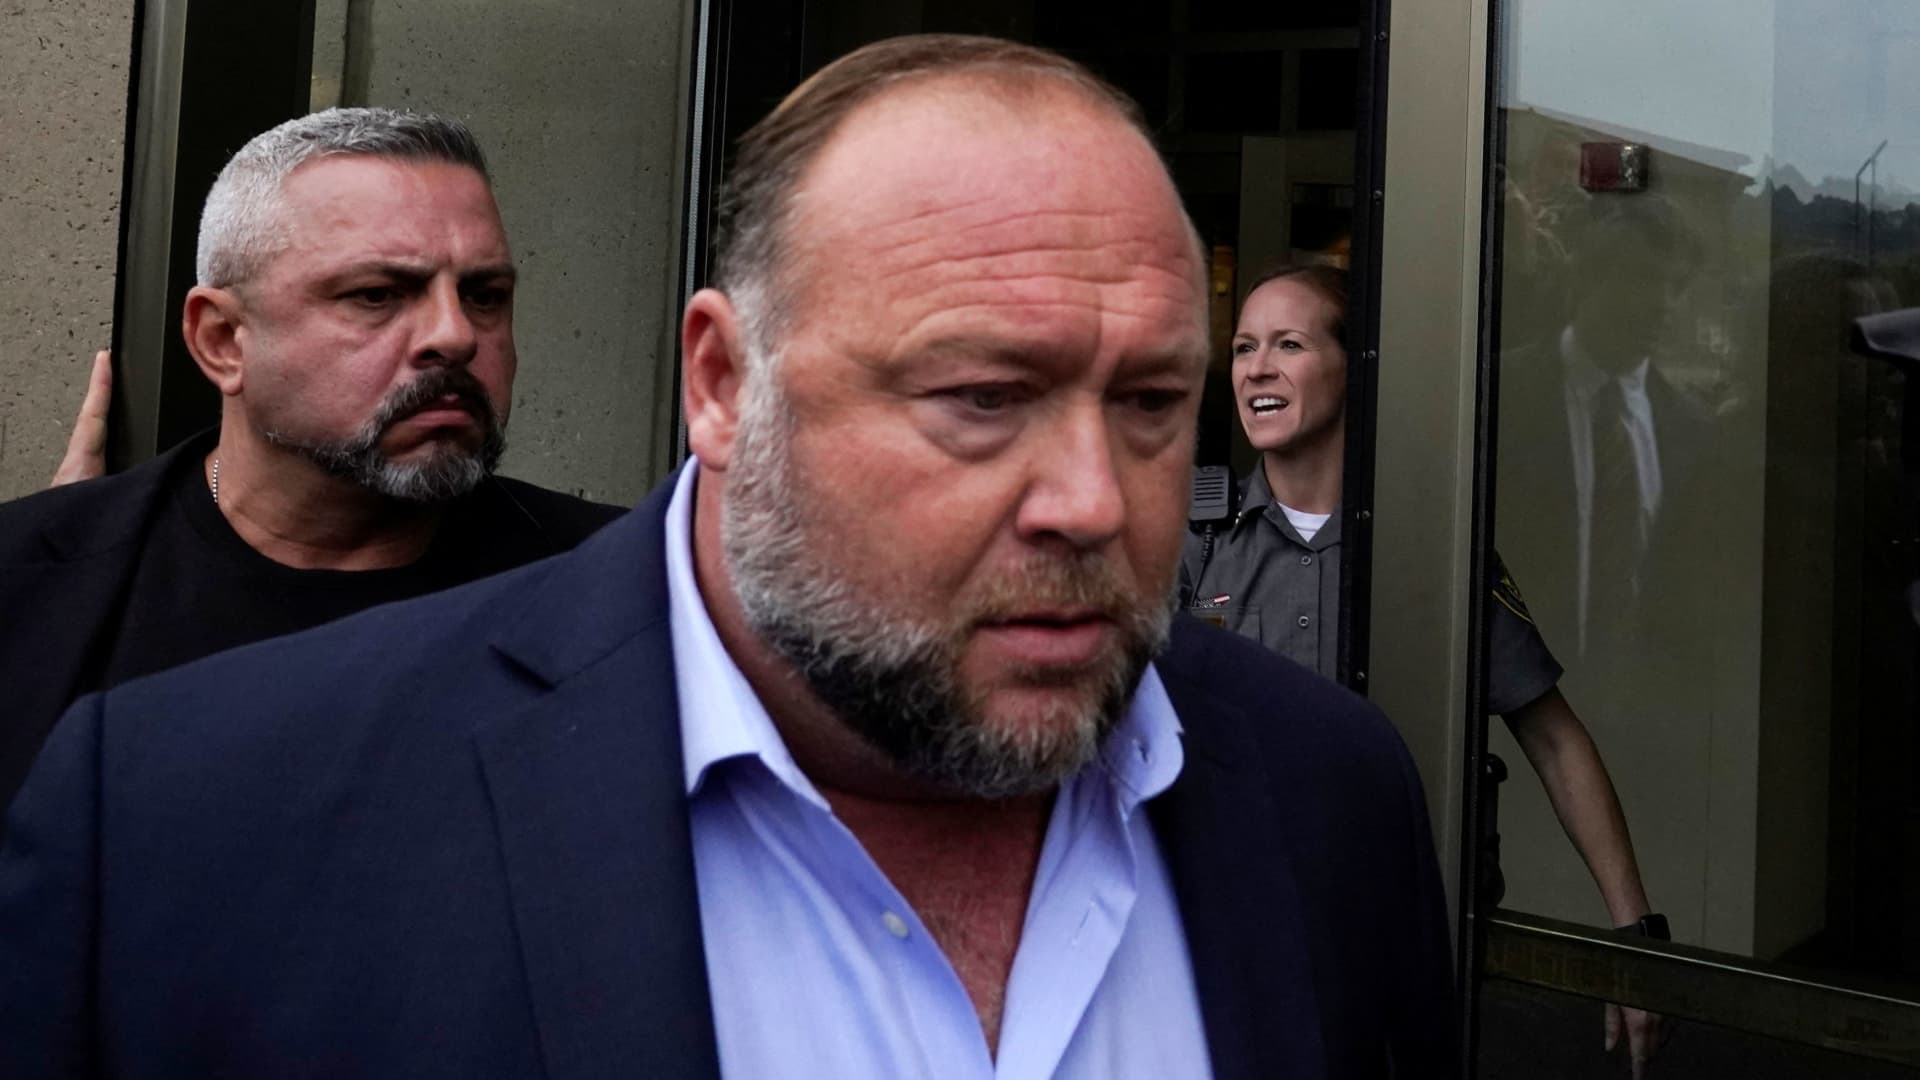 Infowars host Alex Jones files for bankruptcy protection, court records show